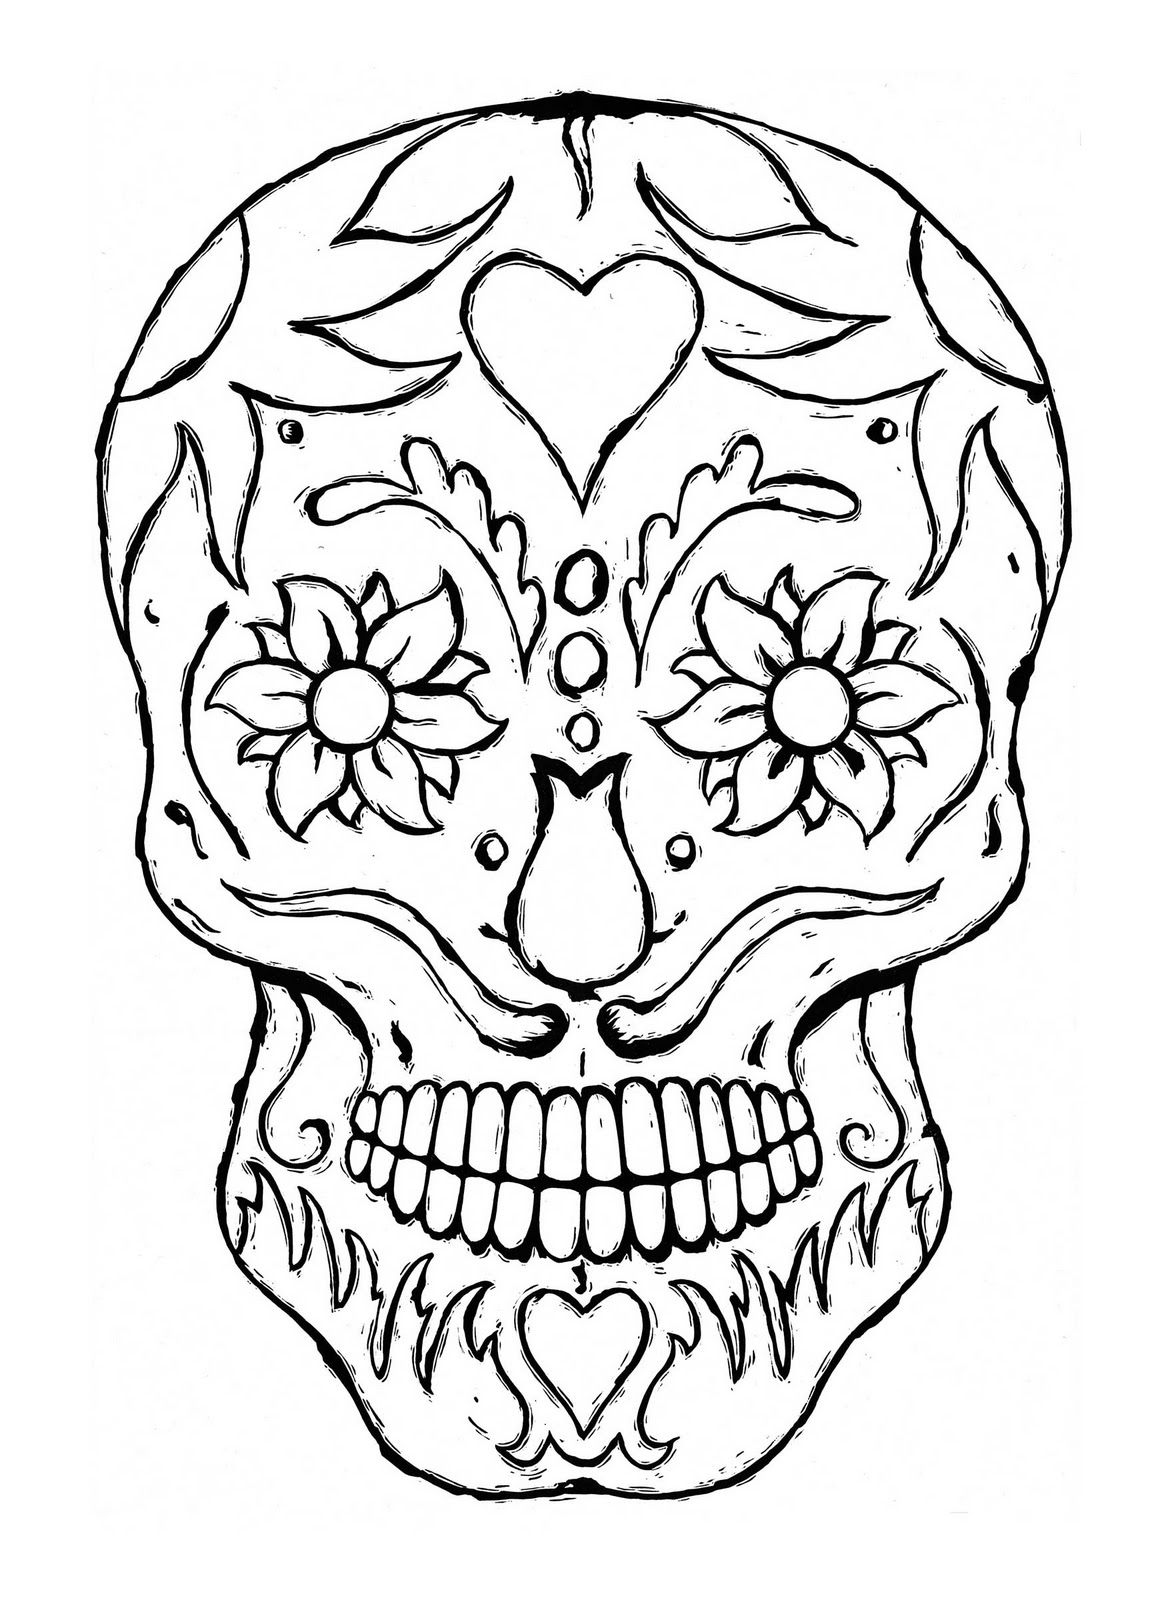 Skull Coloring Page 3